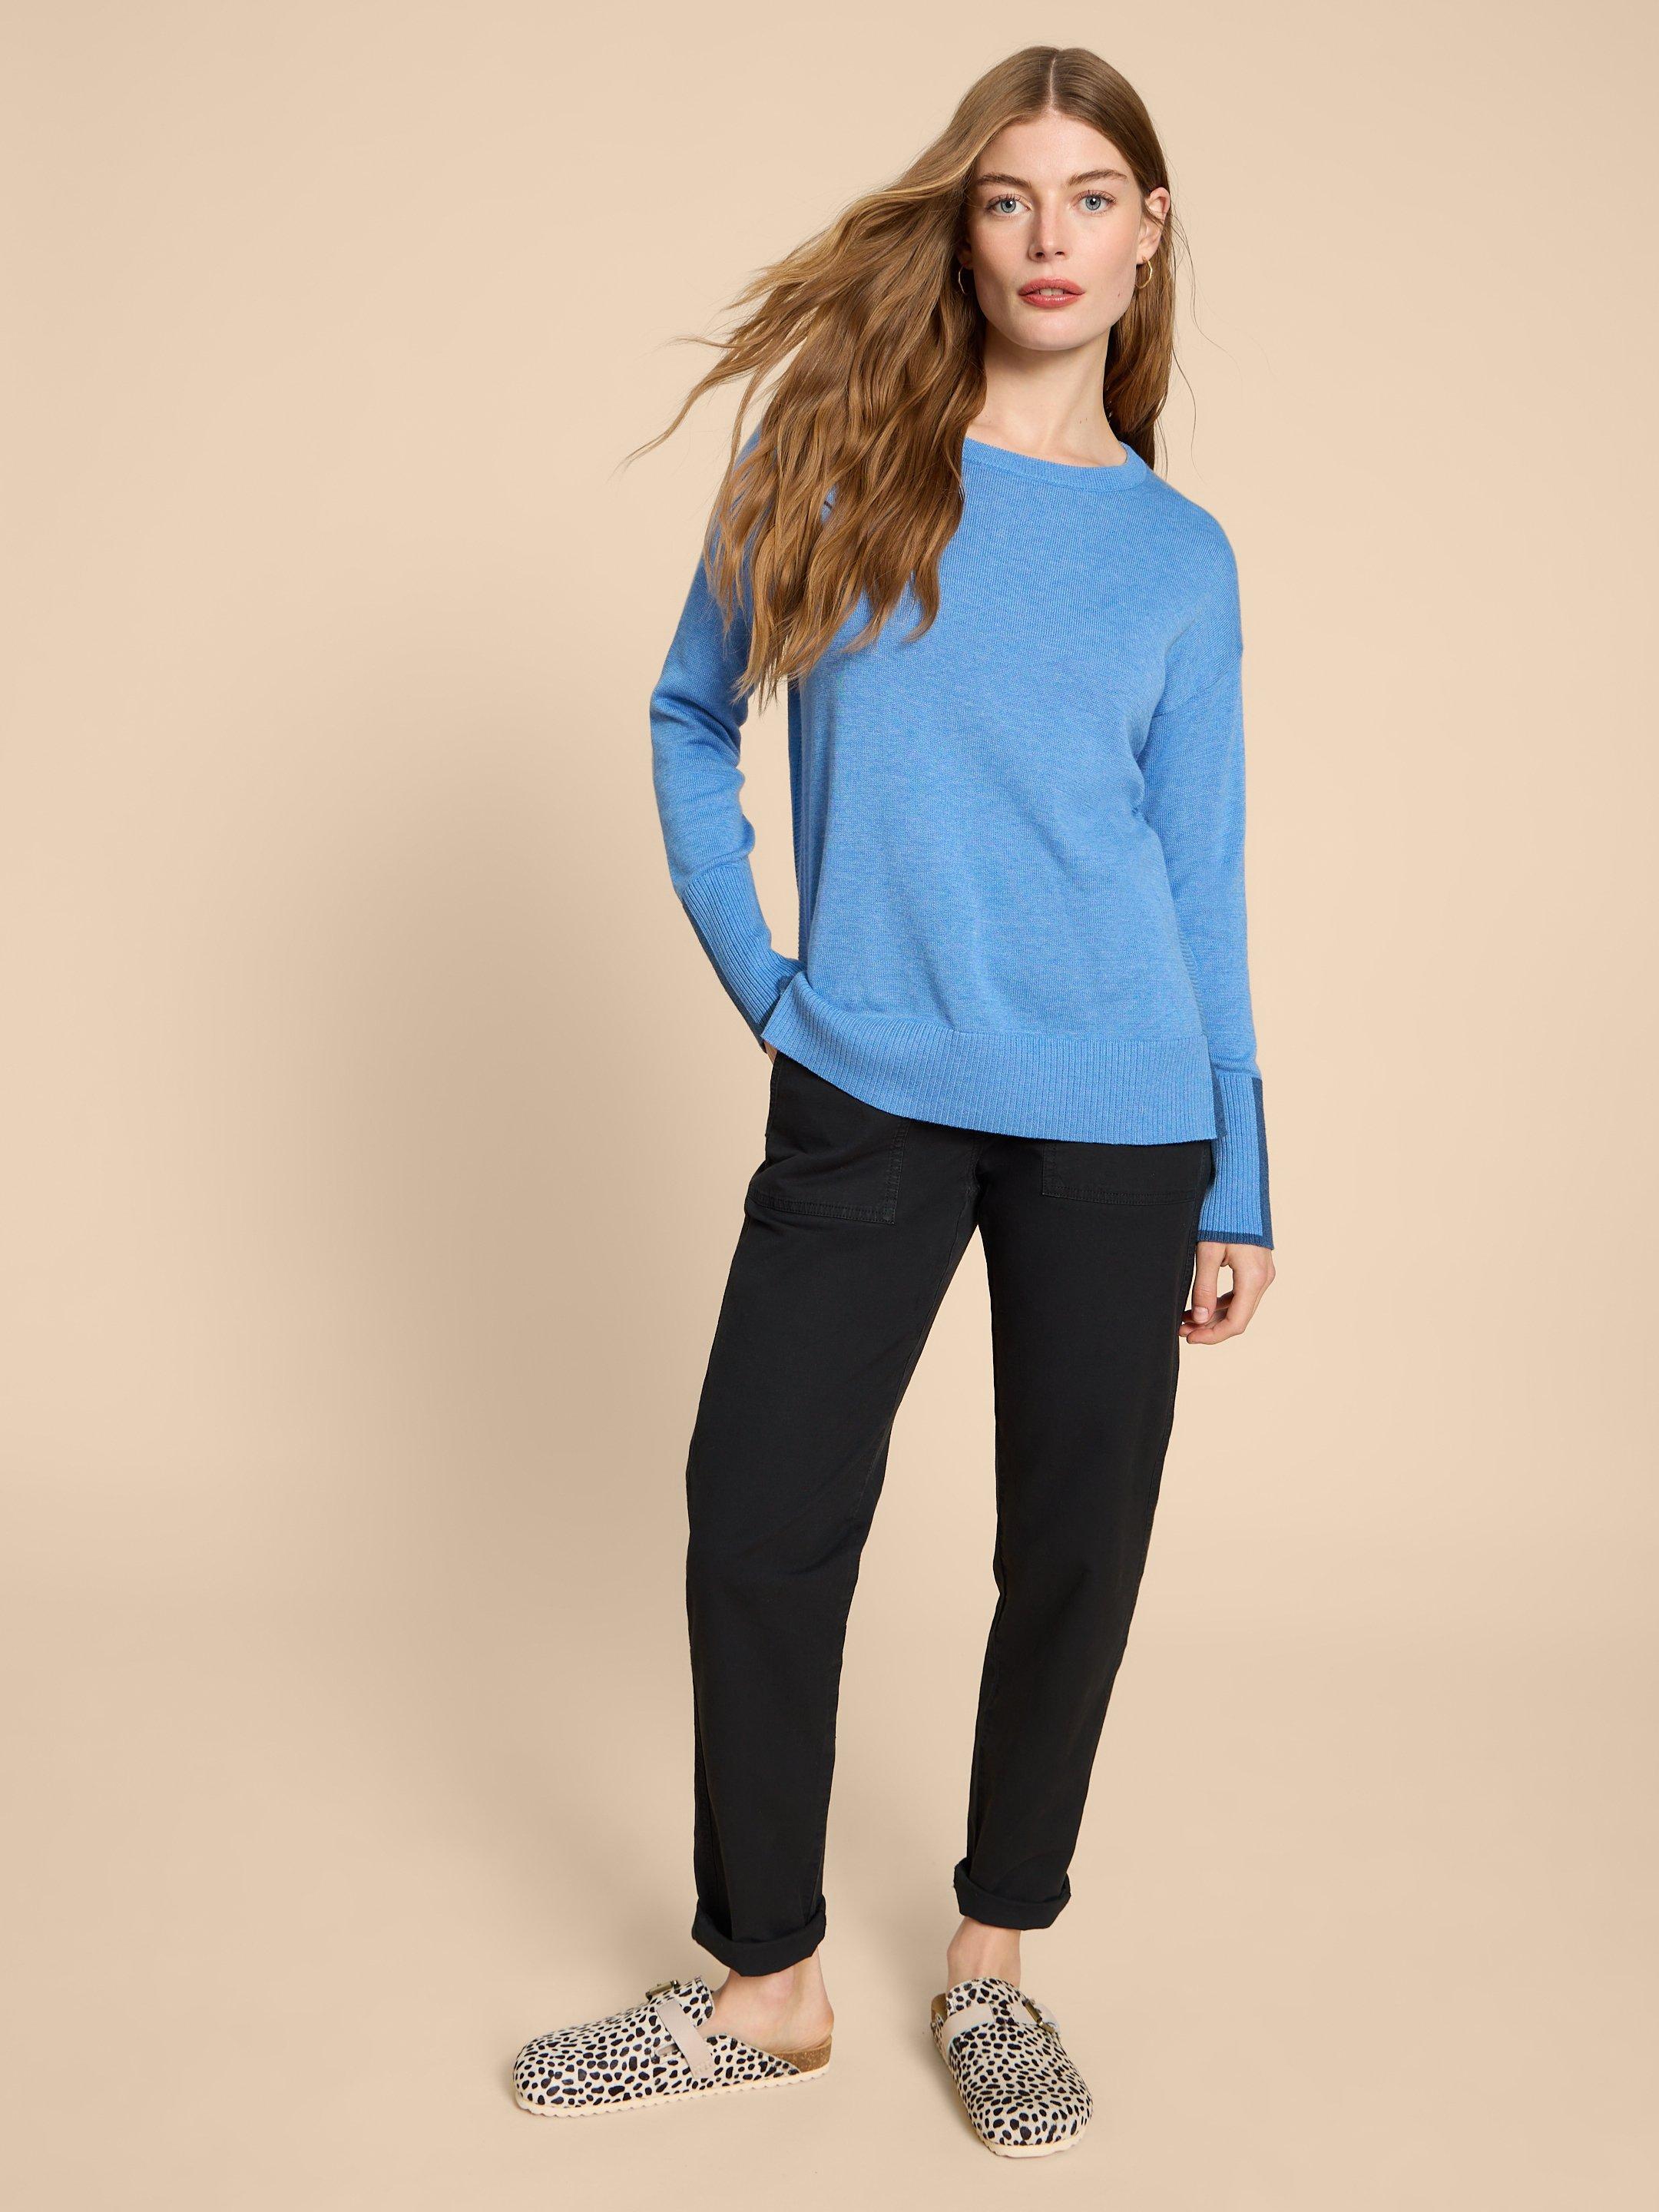 OLIVE CREW JUMPER in CHAMB BLUE - MODEL FRONT